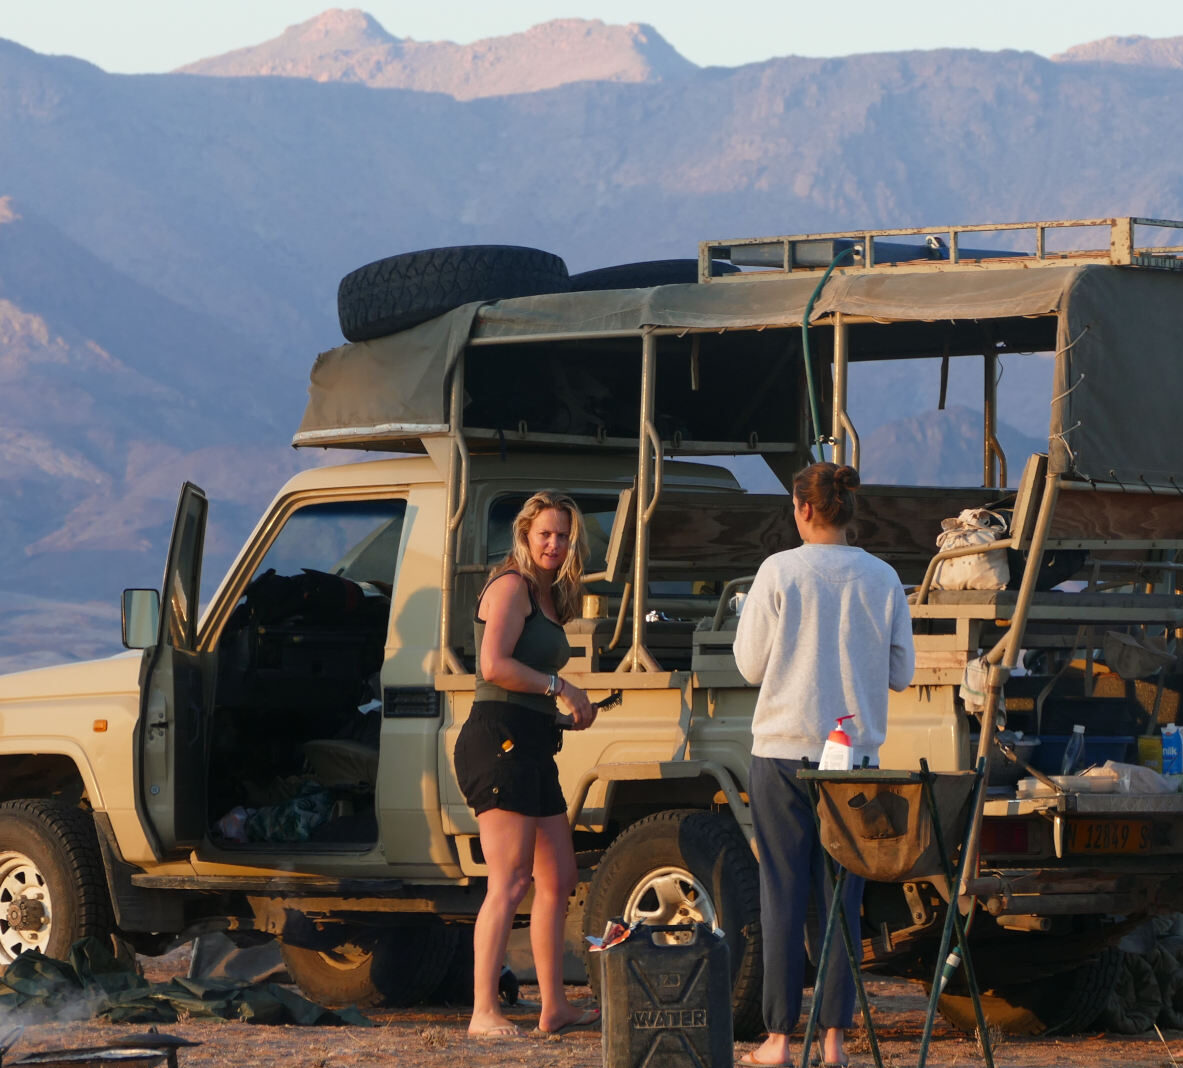 Three girls chat outside the game vehicle with a mountain backdrop